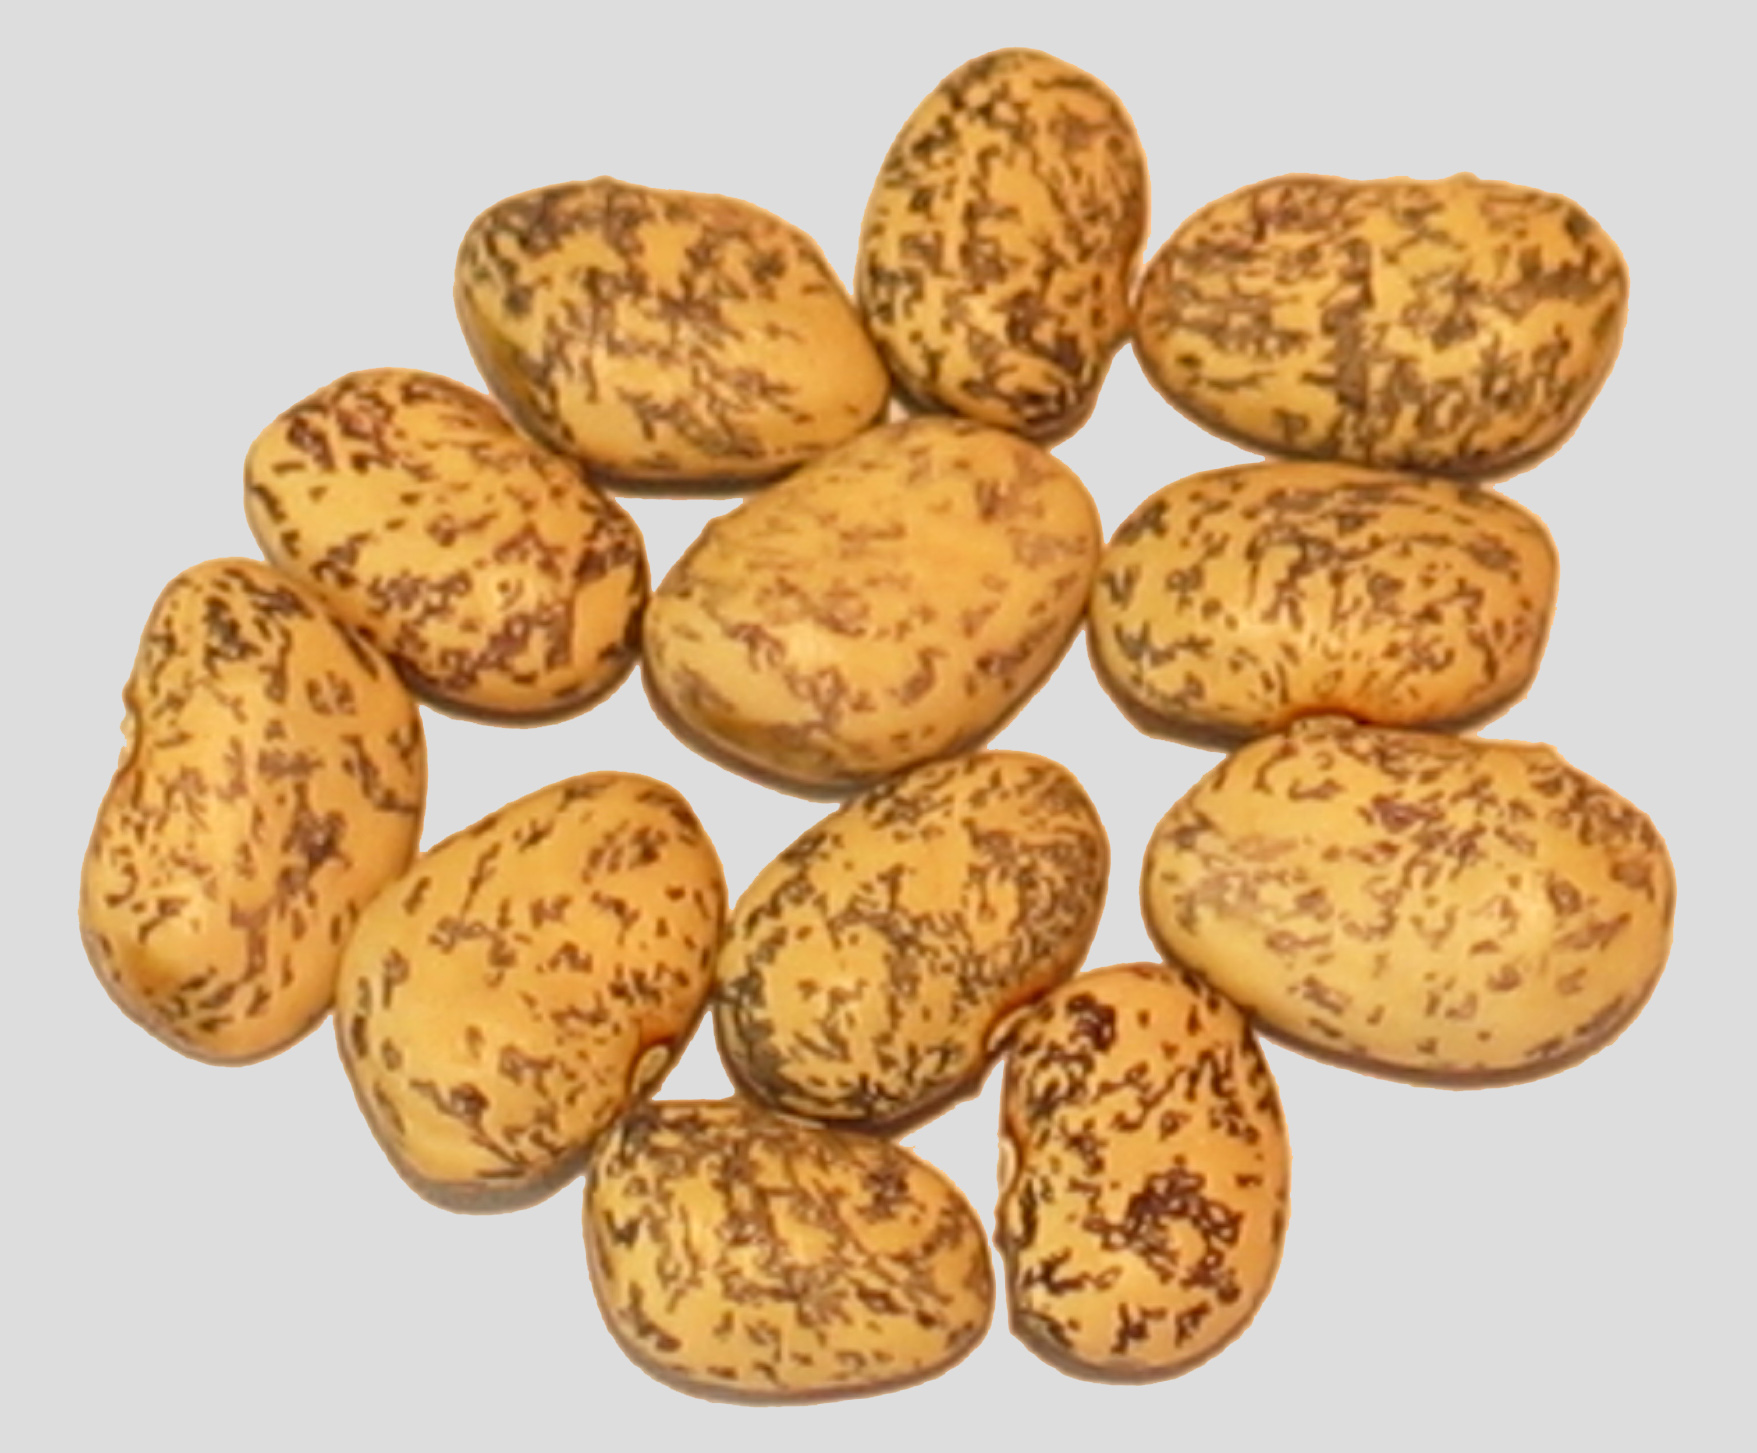 image of Blue Speckled Tepary beans